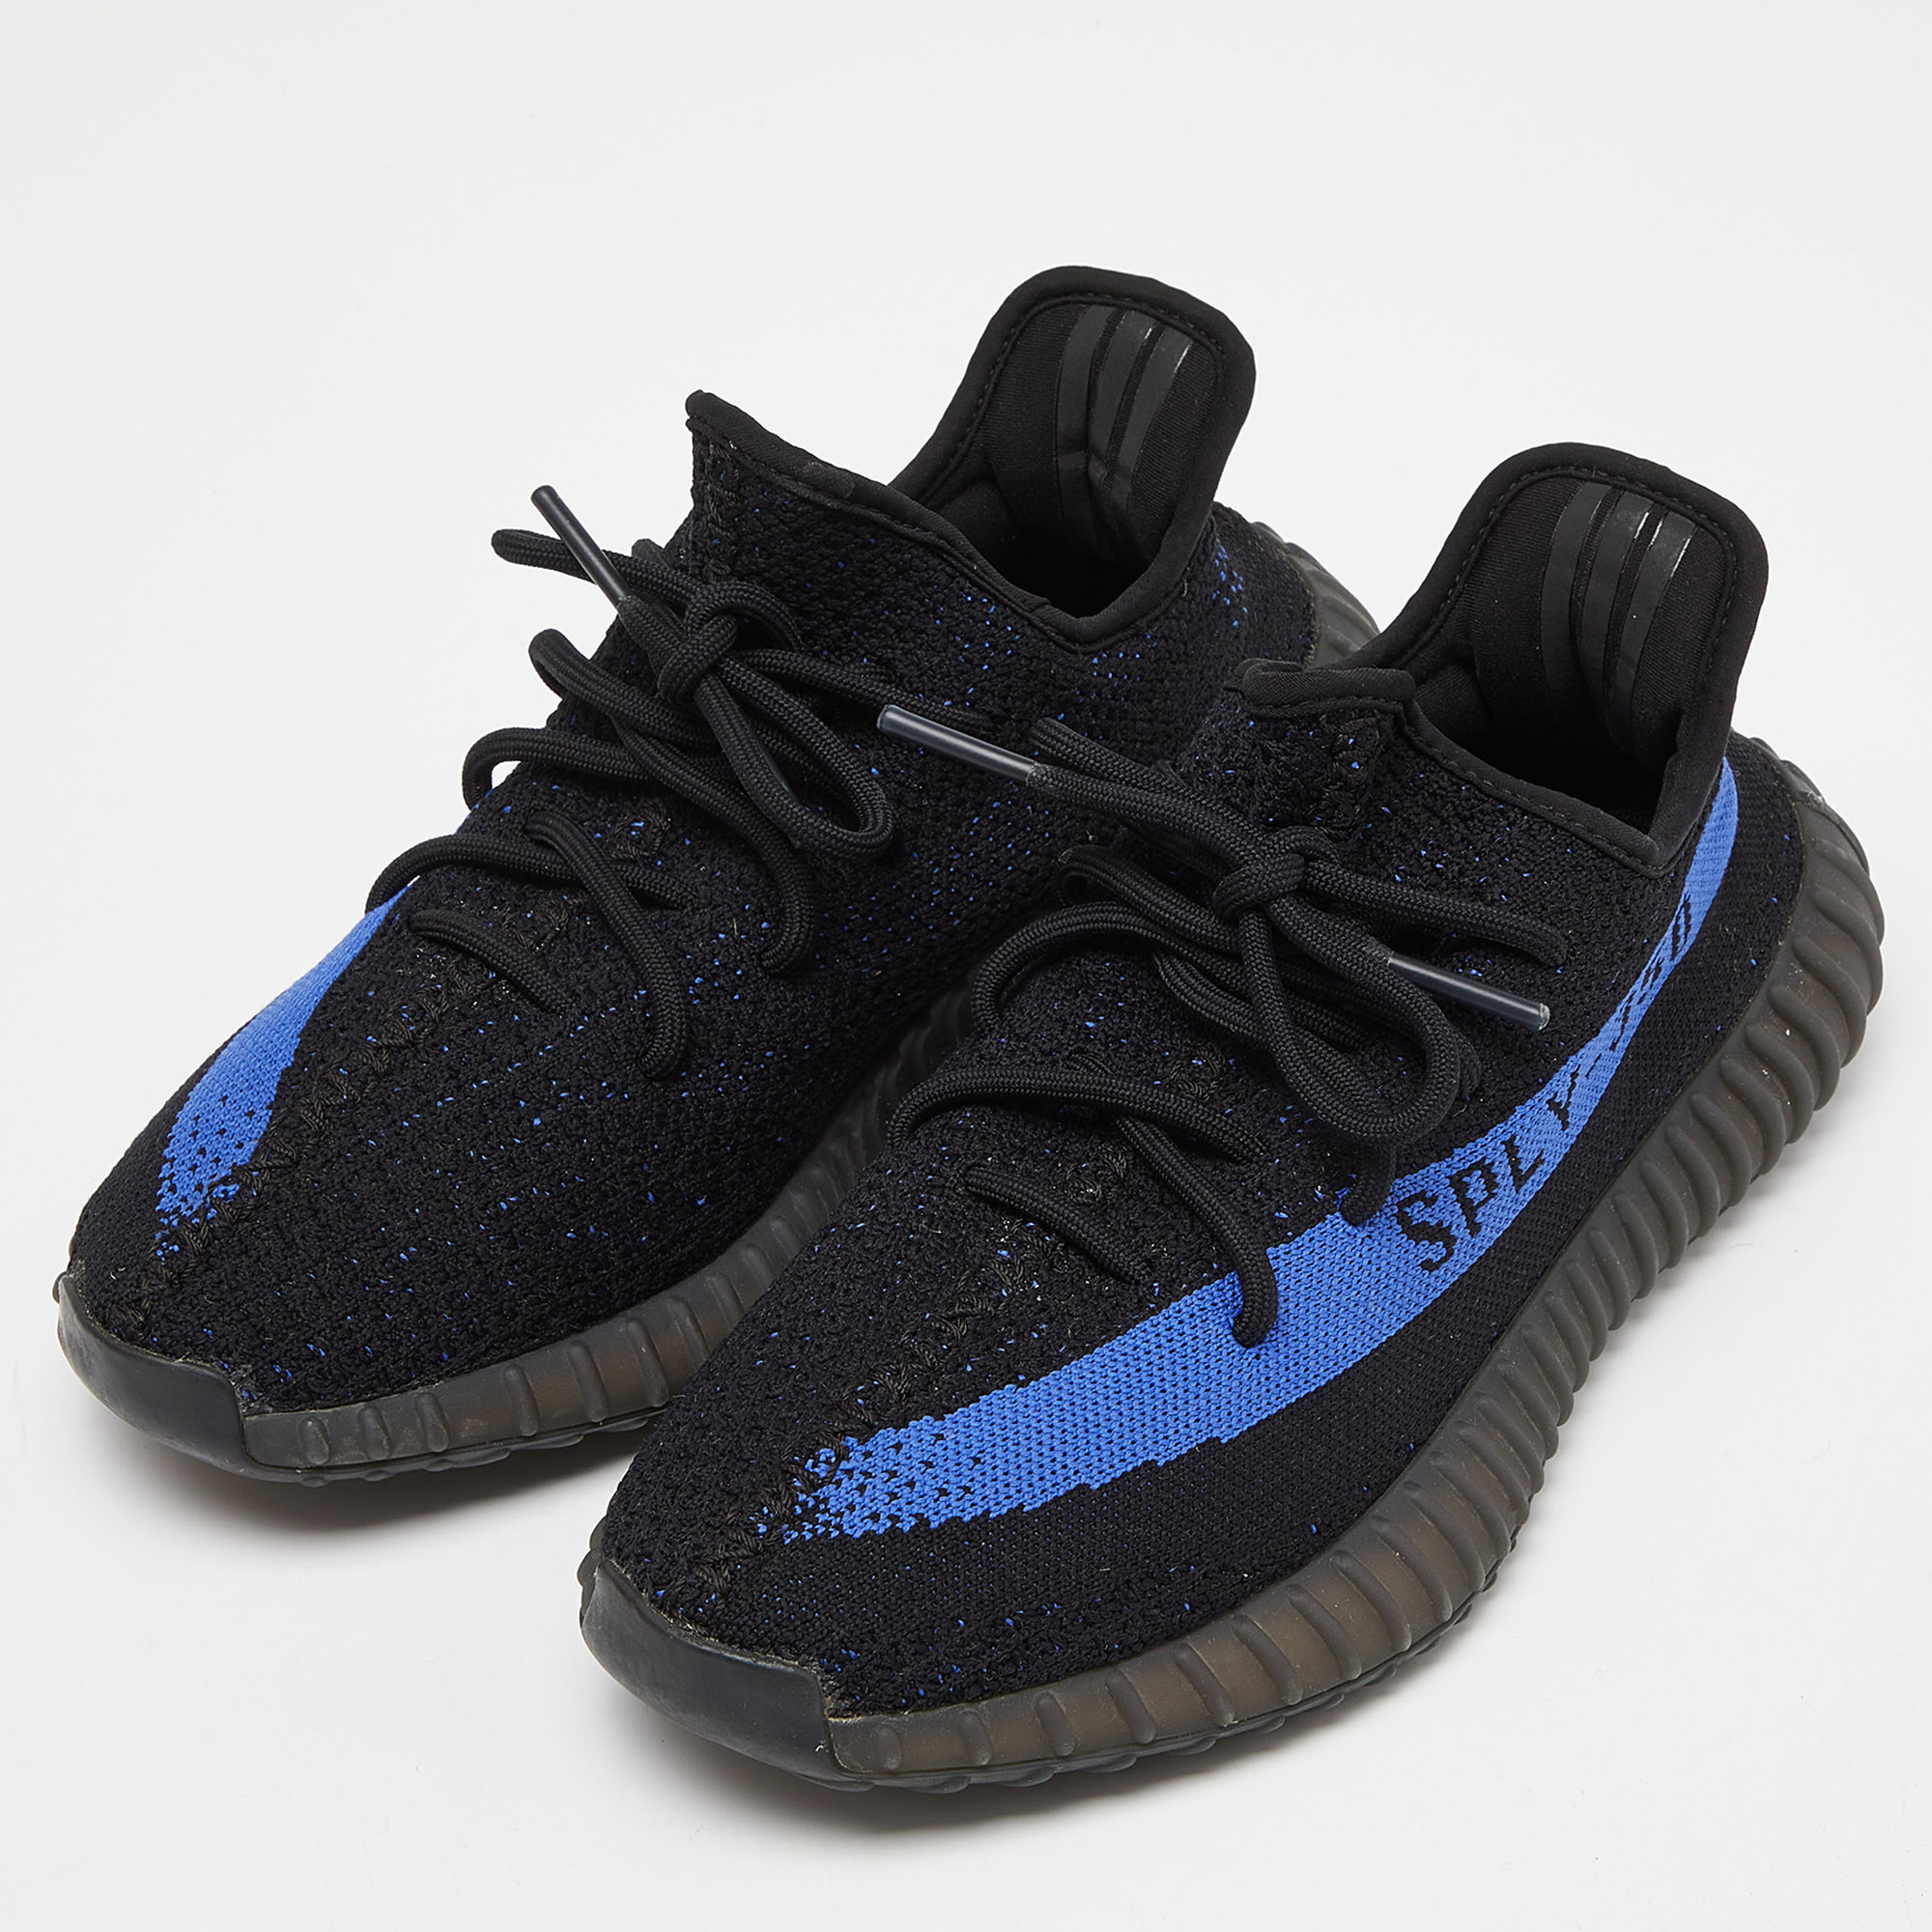 

Yeezy x Adidas Black/Blue Knit Fabric Boost 350 V2 Blue Sneakers Size 40 2/3